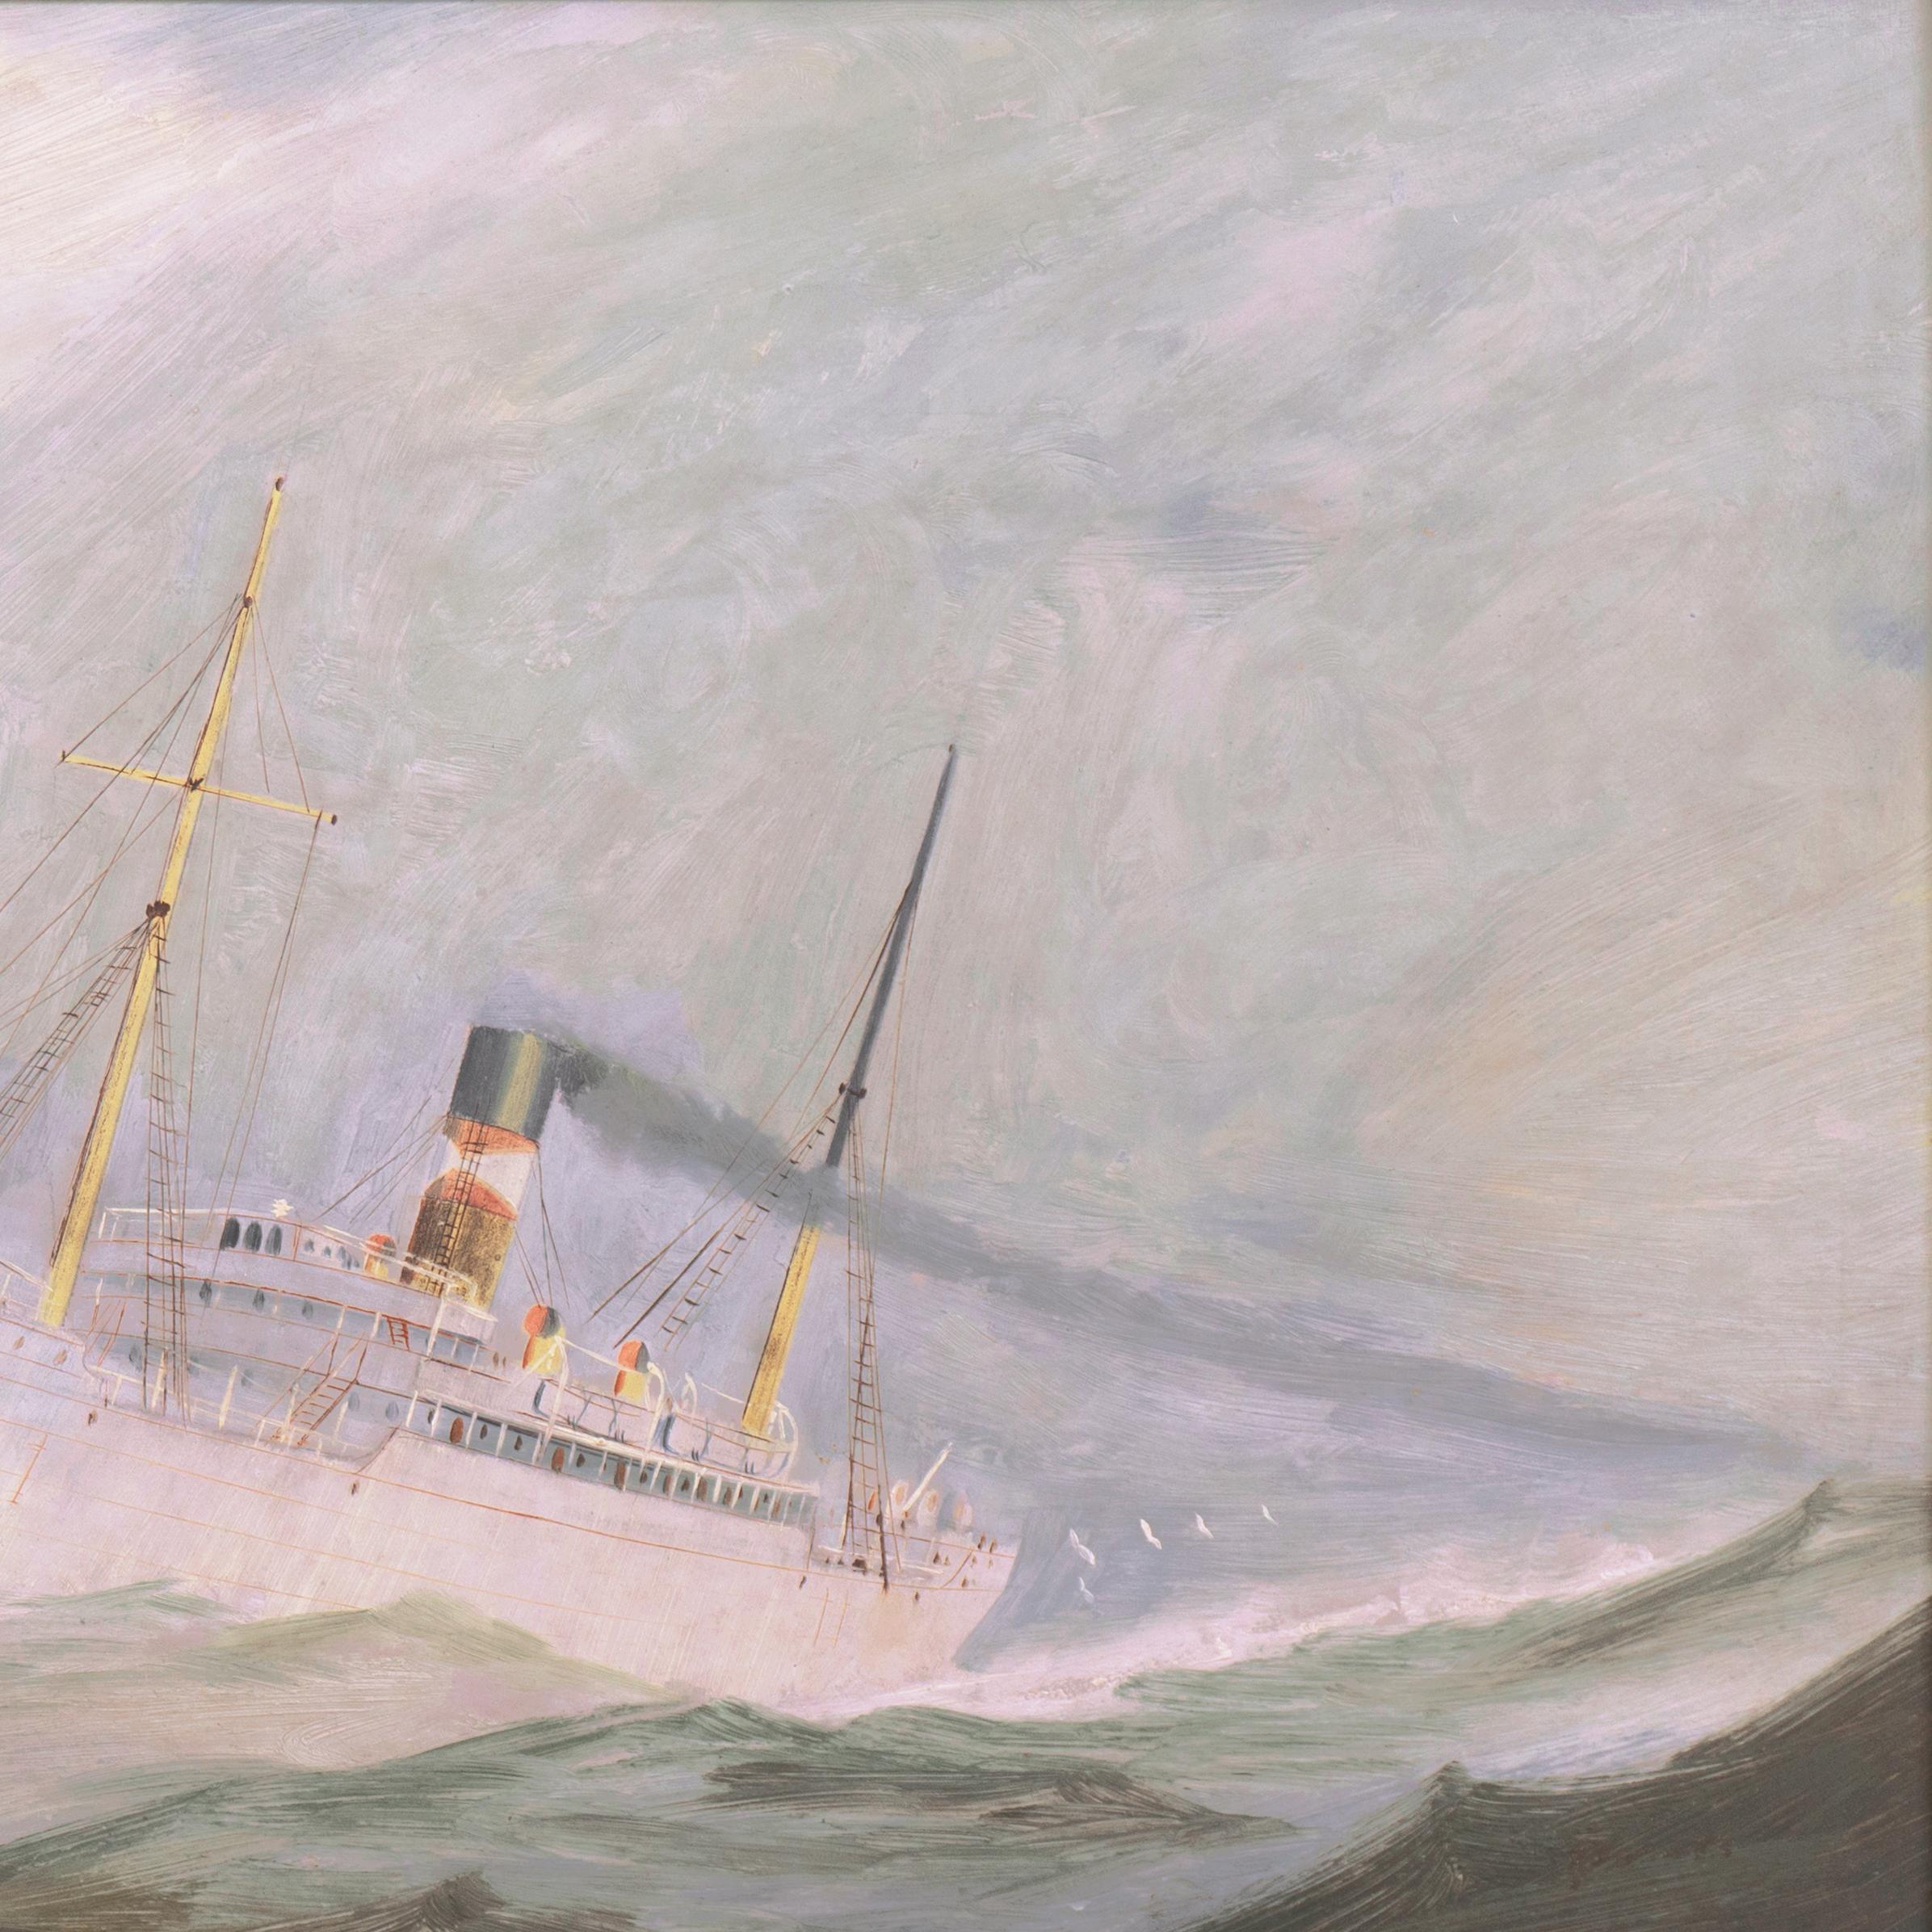 The S.S. San Jose shown making way in medium water. This early refrigerated freighter, built in 1904, was designed to transport bananas between the Caribbean and the American mainland. Painted white to lower interior temperatures, the San Jose